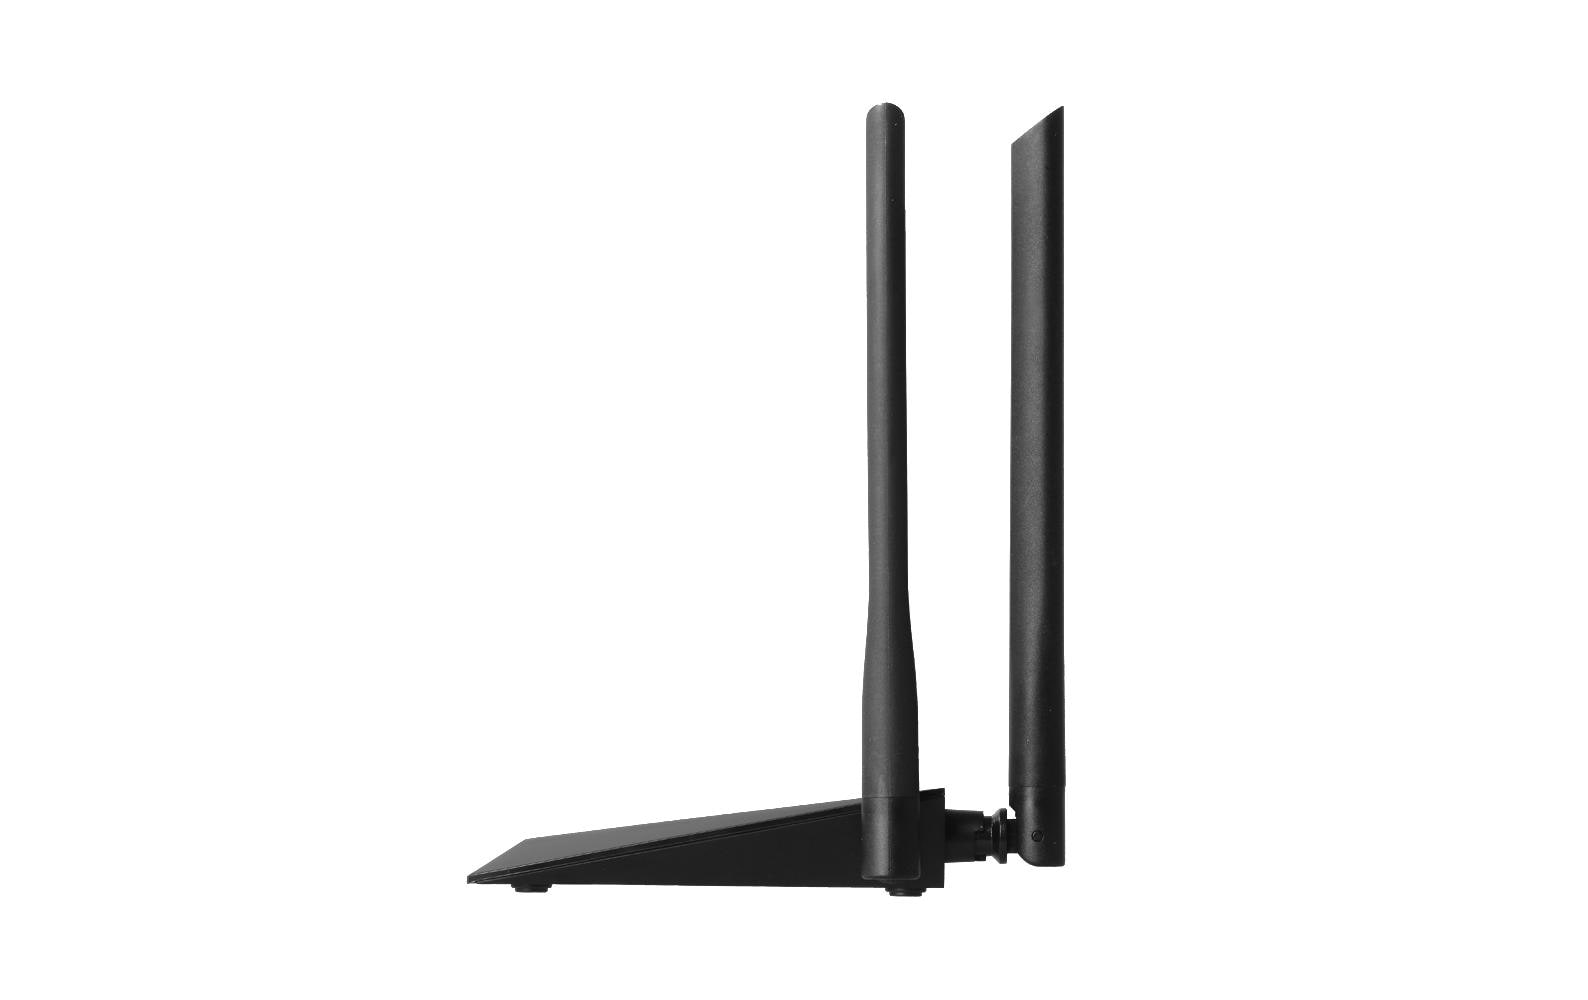 Edimax Dual-Band WiFi Router BR-6476AC